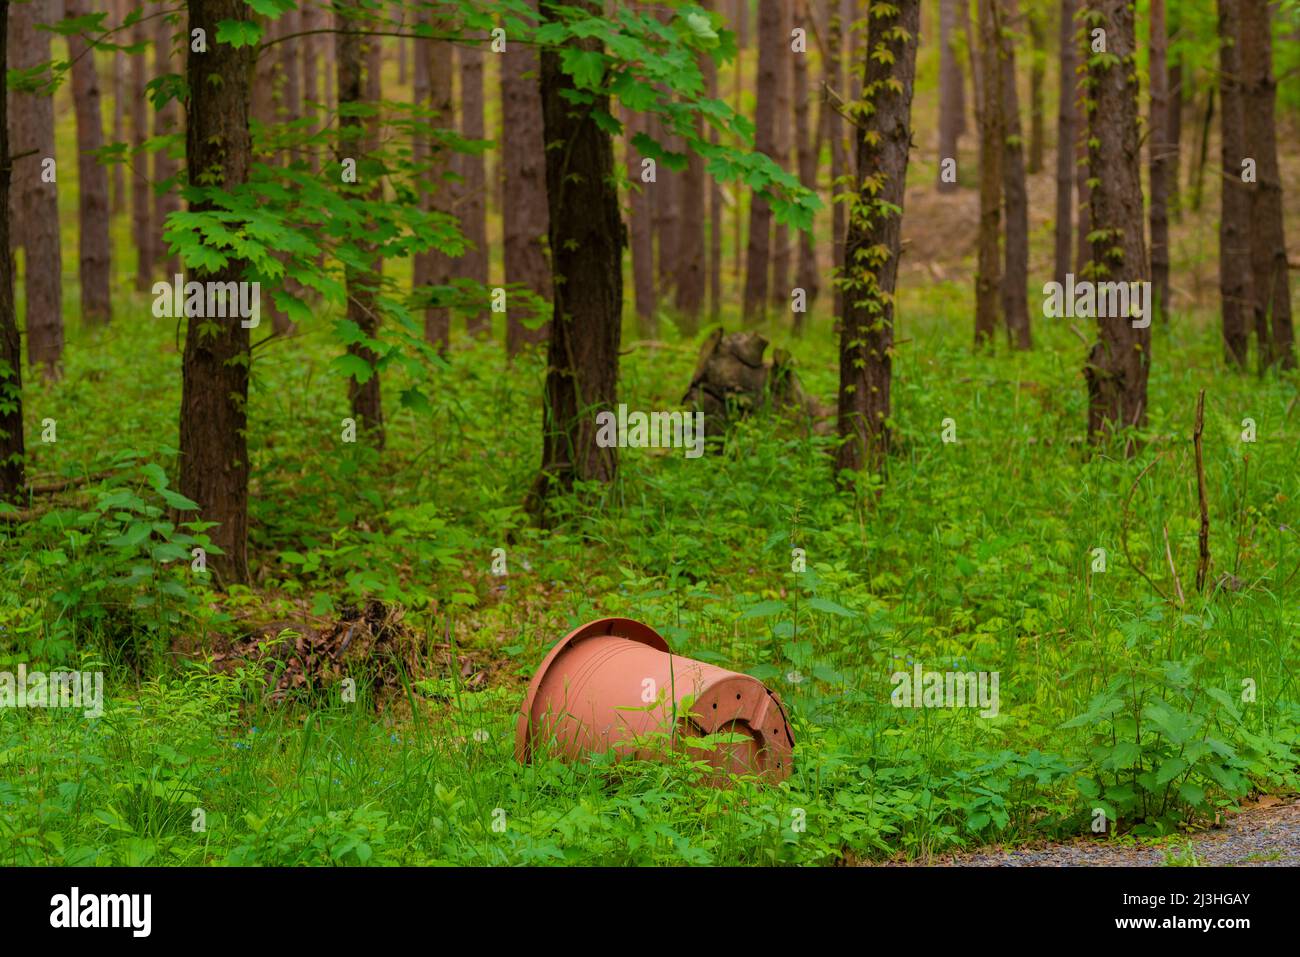 Pollution, illegally disposed plastic flower pot in a forest, garden waste Stock Photo